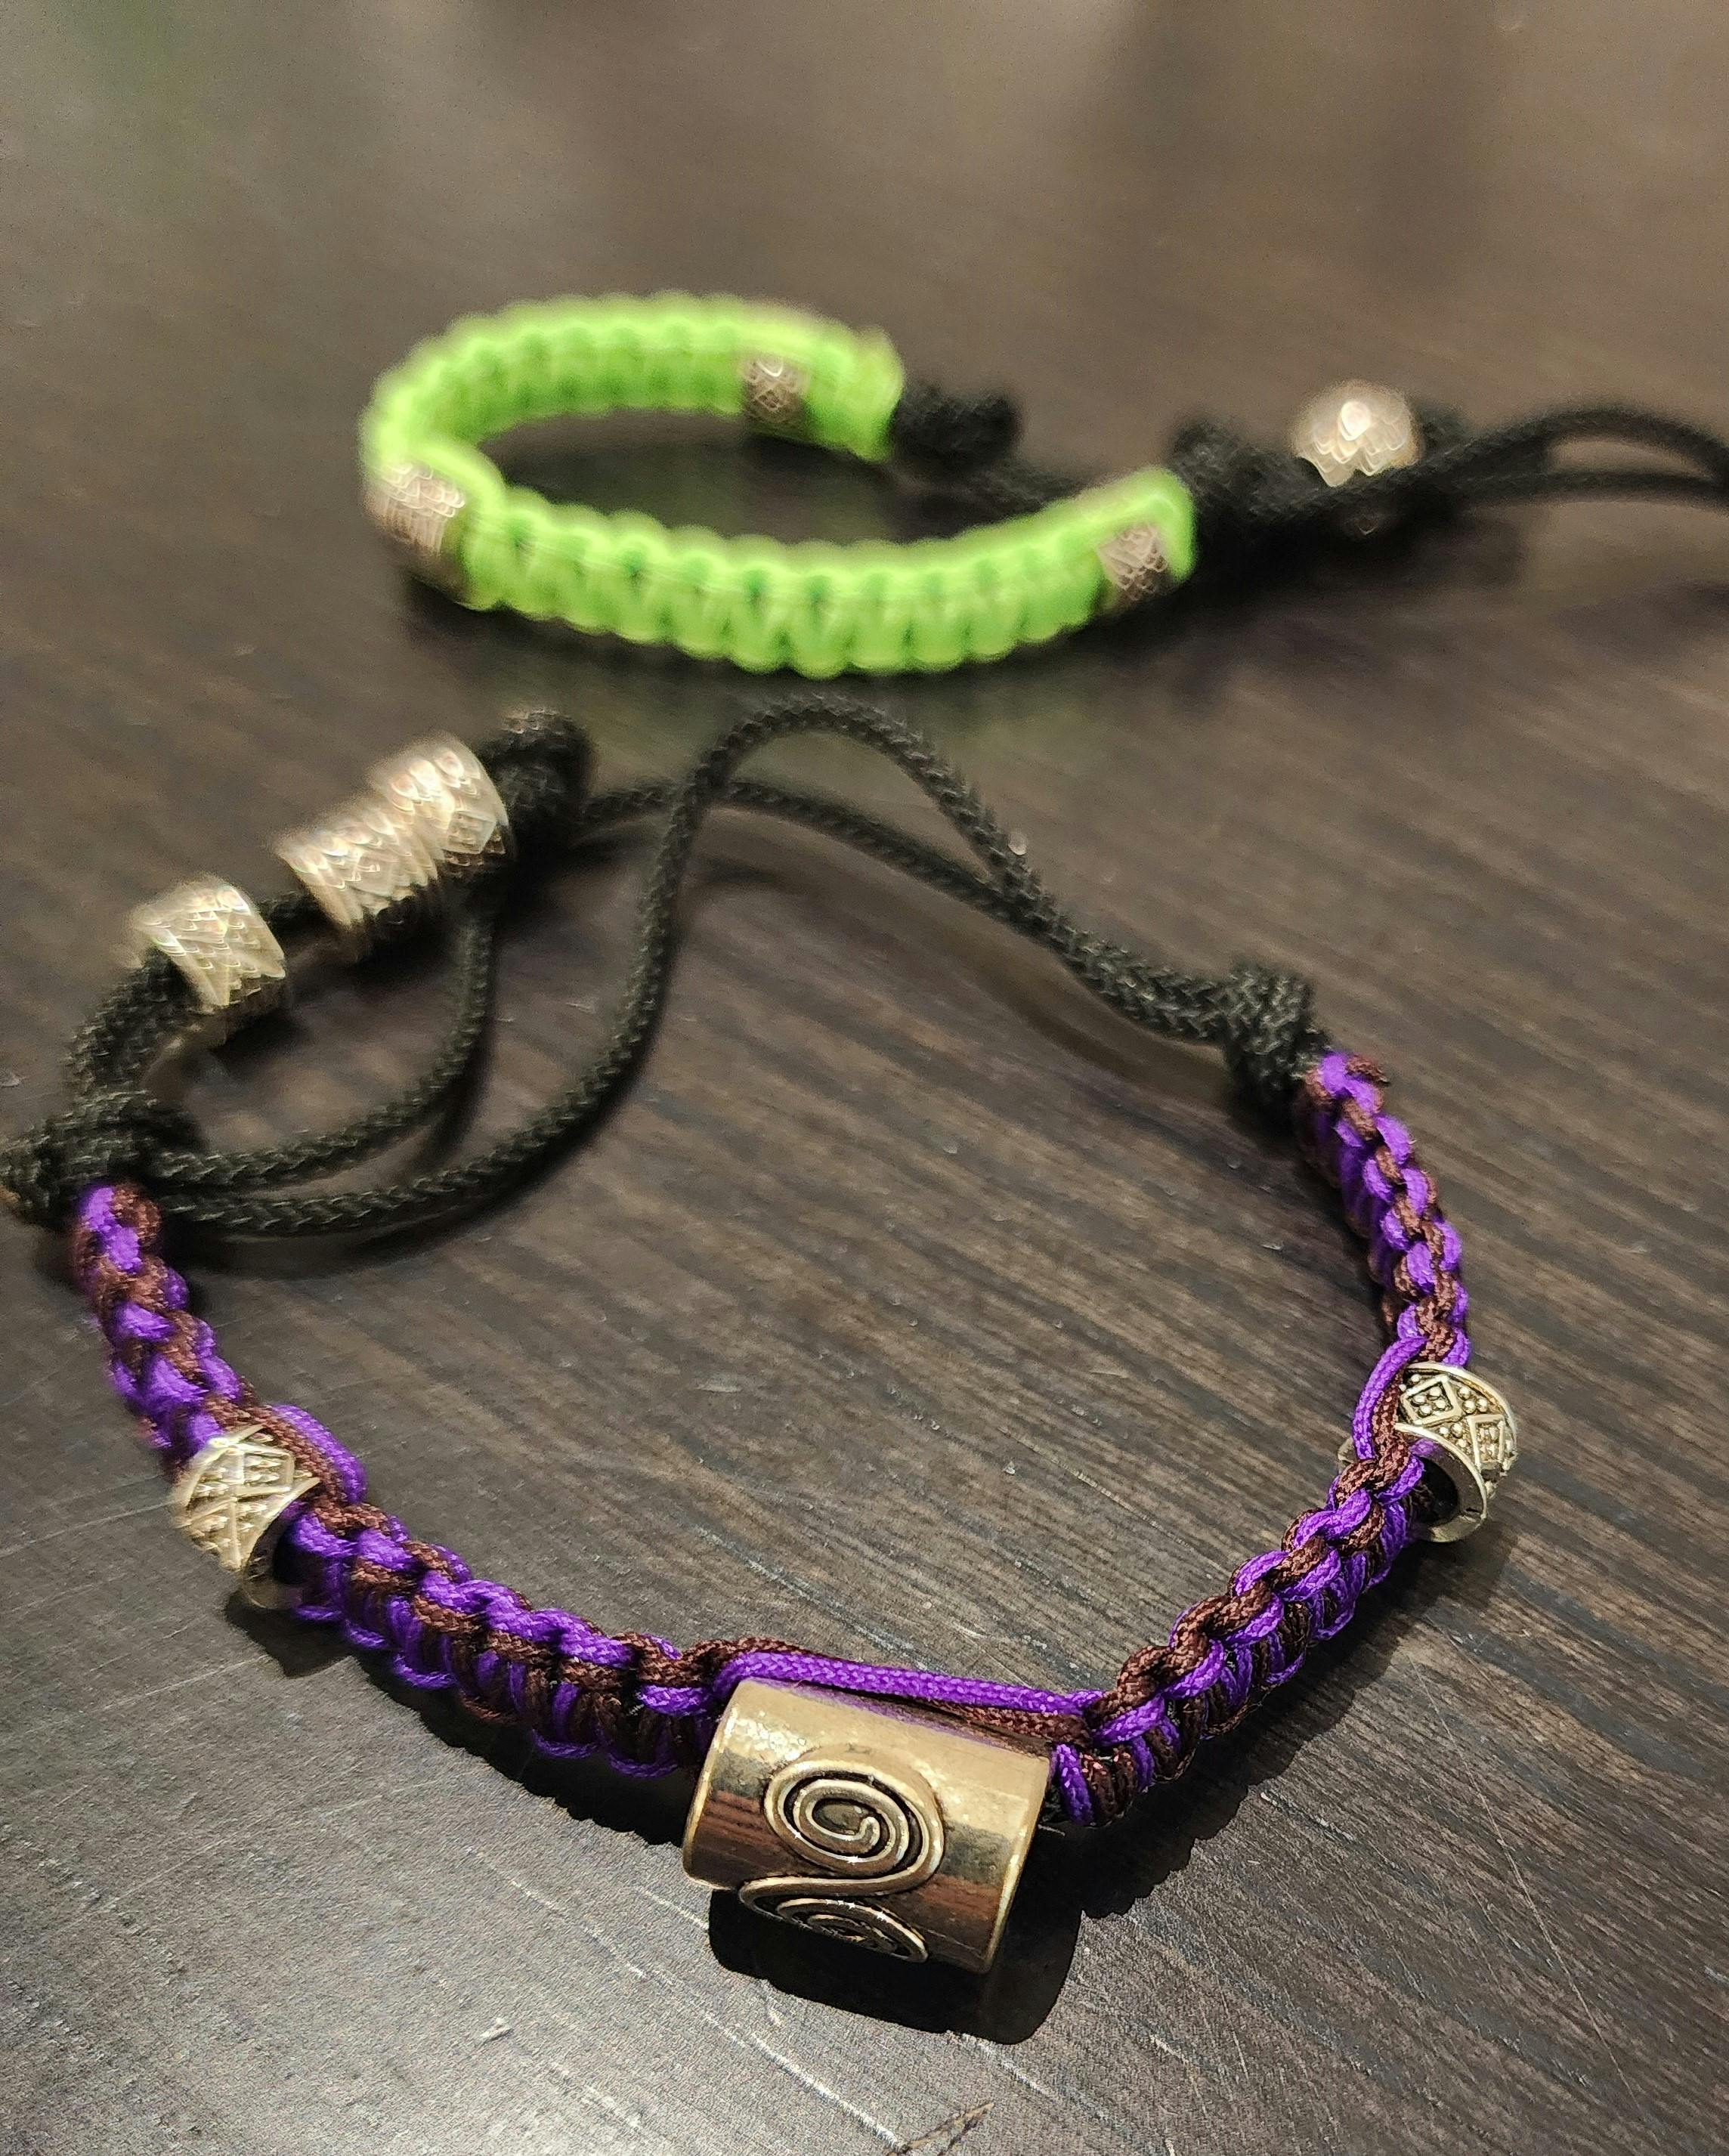 Bracelets made of nylon and paracord with metal beads.